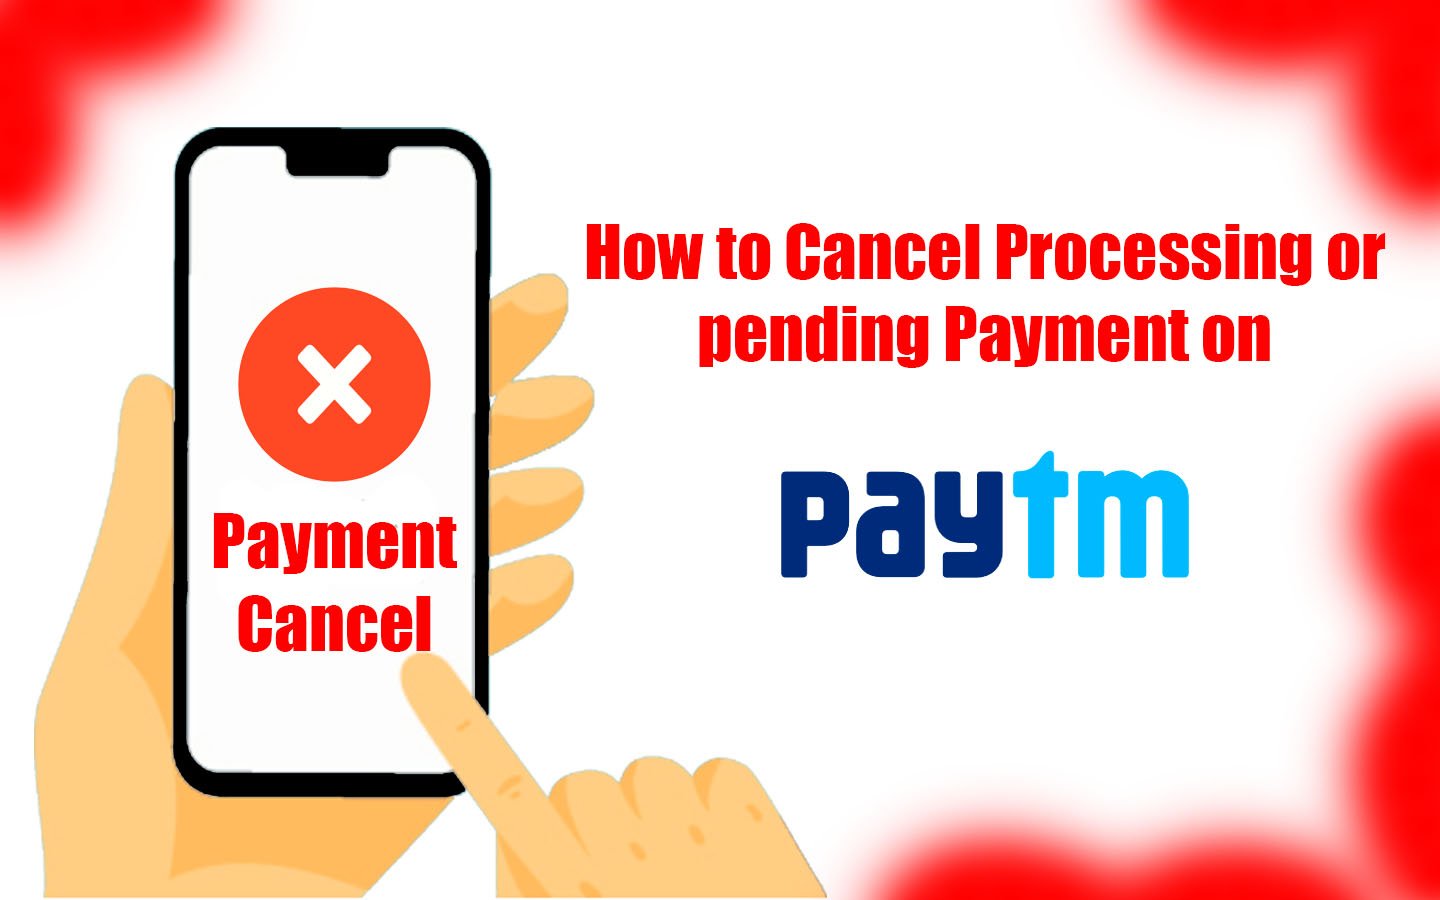 How to Cancel Pending/Processing Payment